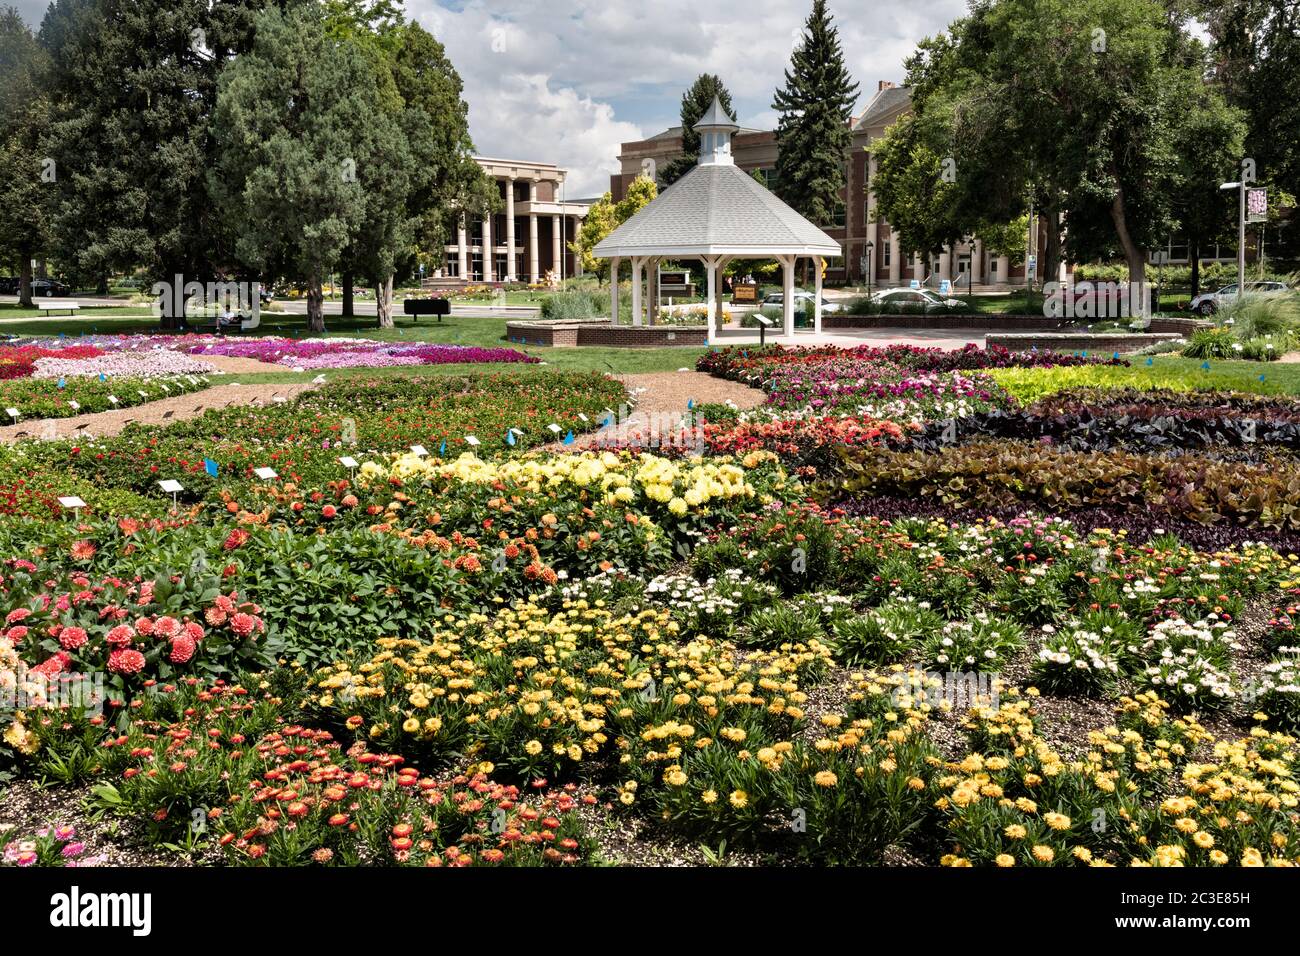 The Flower Trial Garden at Colorado State University in Fort Collins, Colorado. The garden is to evaluate the performance of different annual plant cultivars under the unique Rocky Mountain environmental conditions. Stock Photo